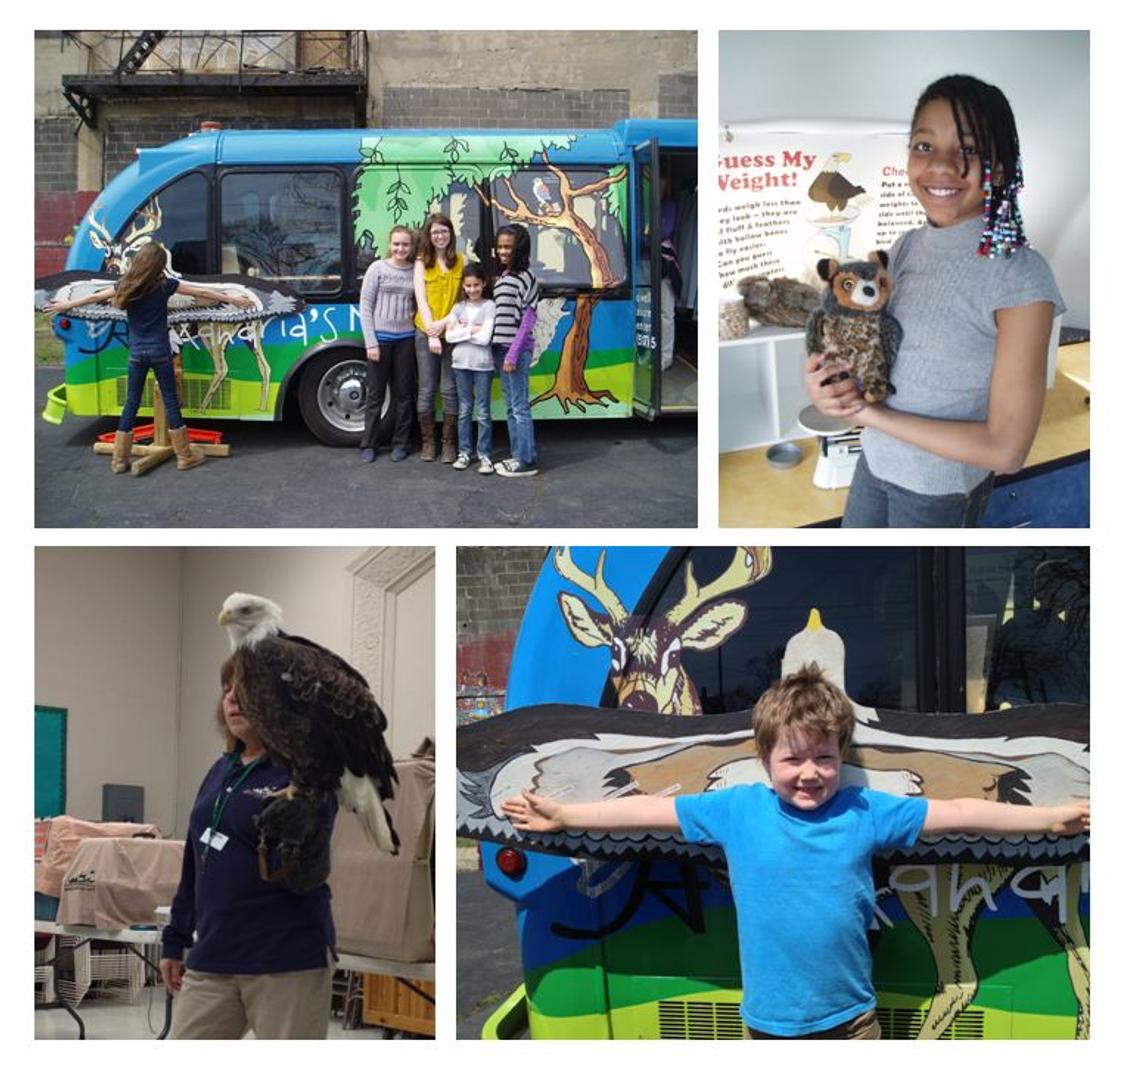 Charlotte Mason Community School Photo #1 - The Spirit of Alexandria Foundation generously funded the Nature Bus to come to CMCS and teach the students about birds and nature!